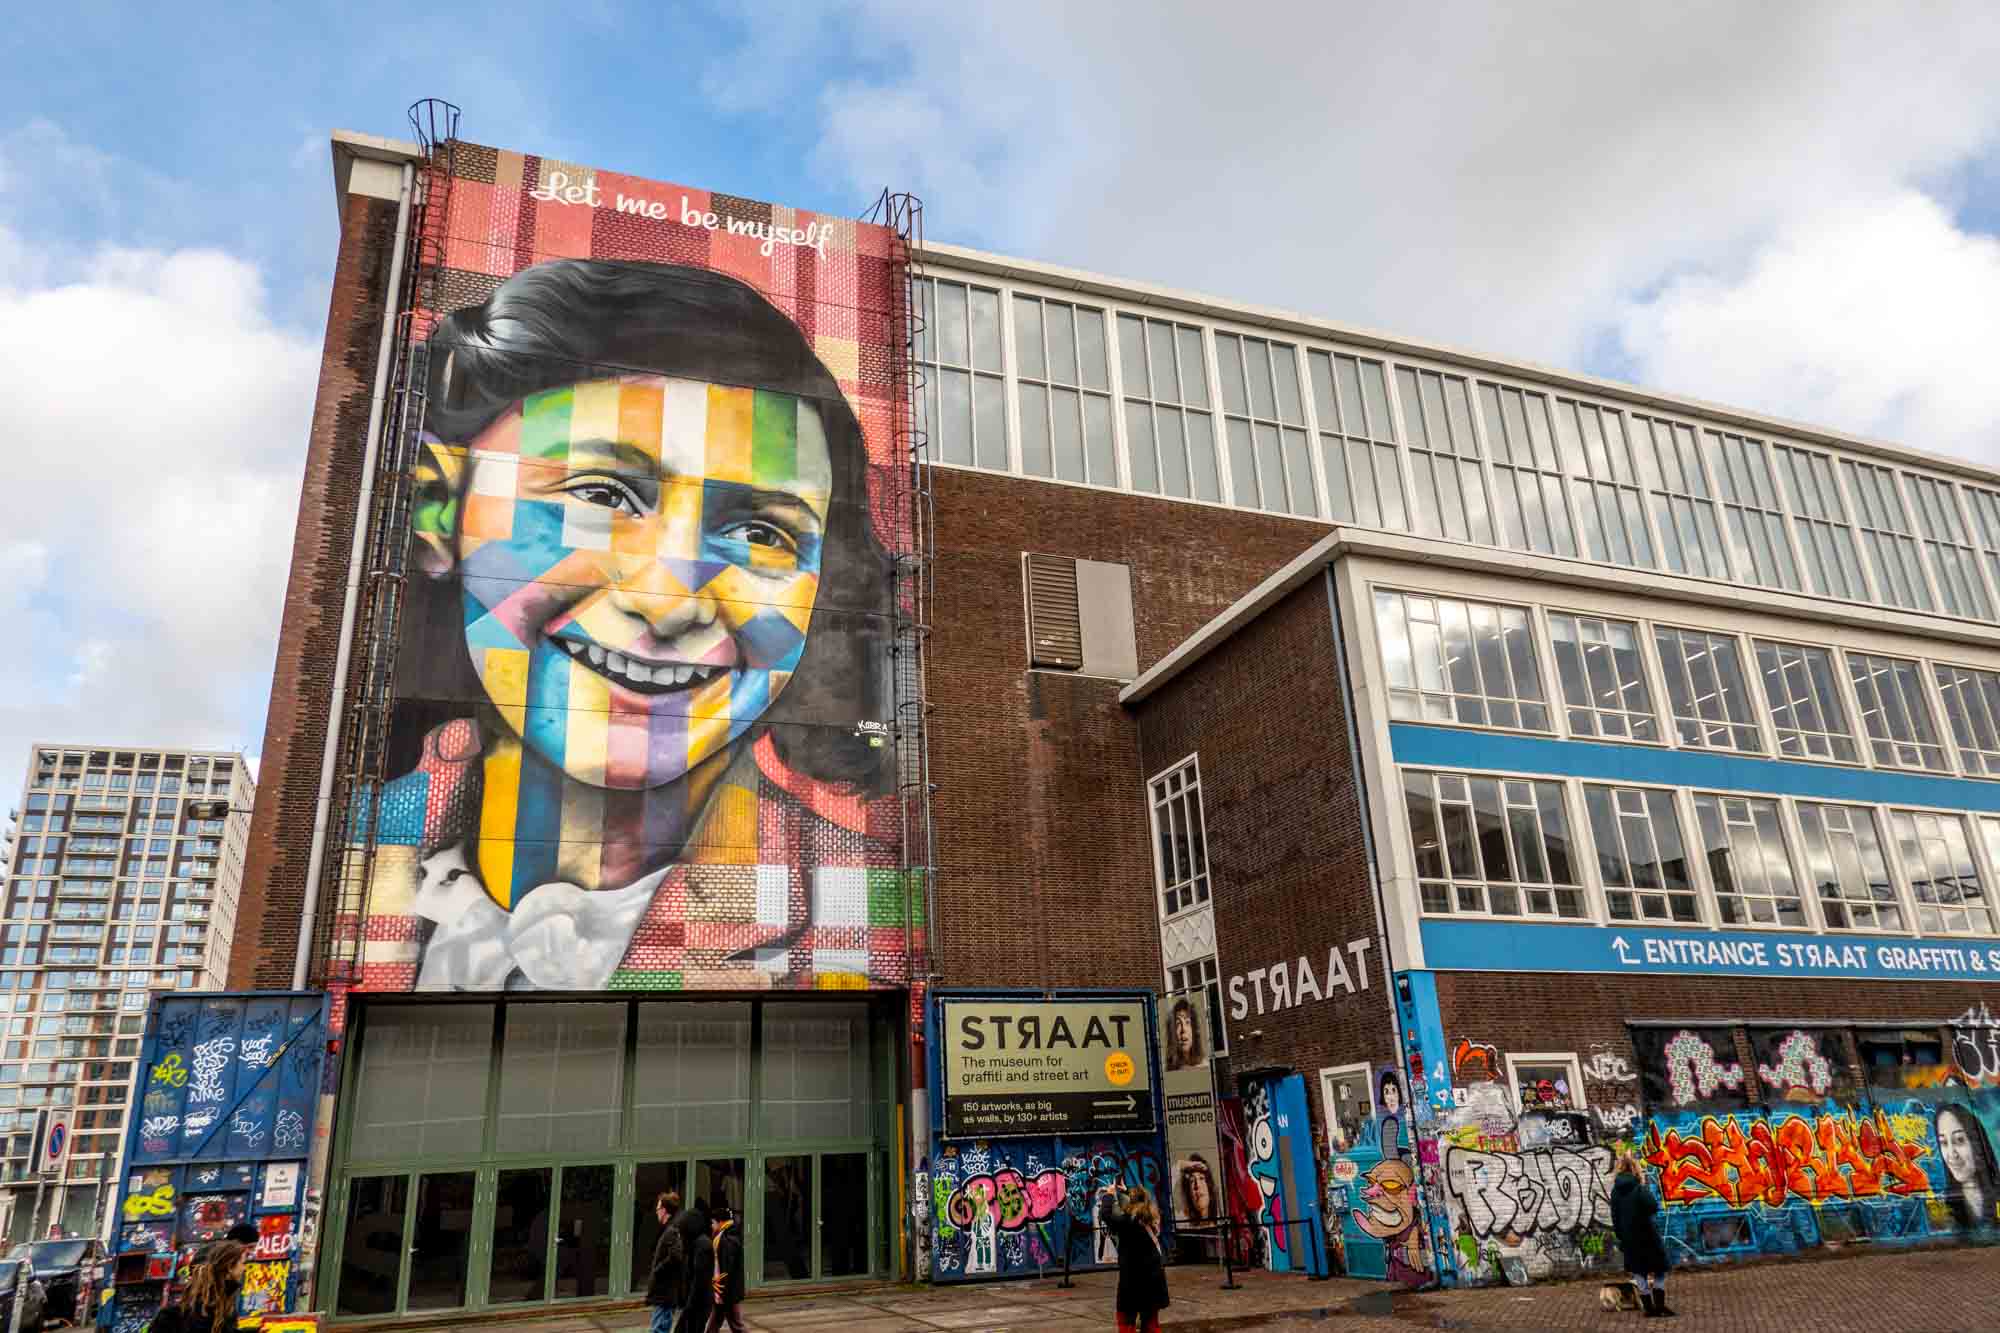 Exterior of the STRAAT Graffiti and street art museum, featuring a giant mural of Anne Frank with the words "Let me be myself"